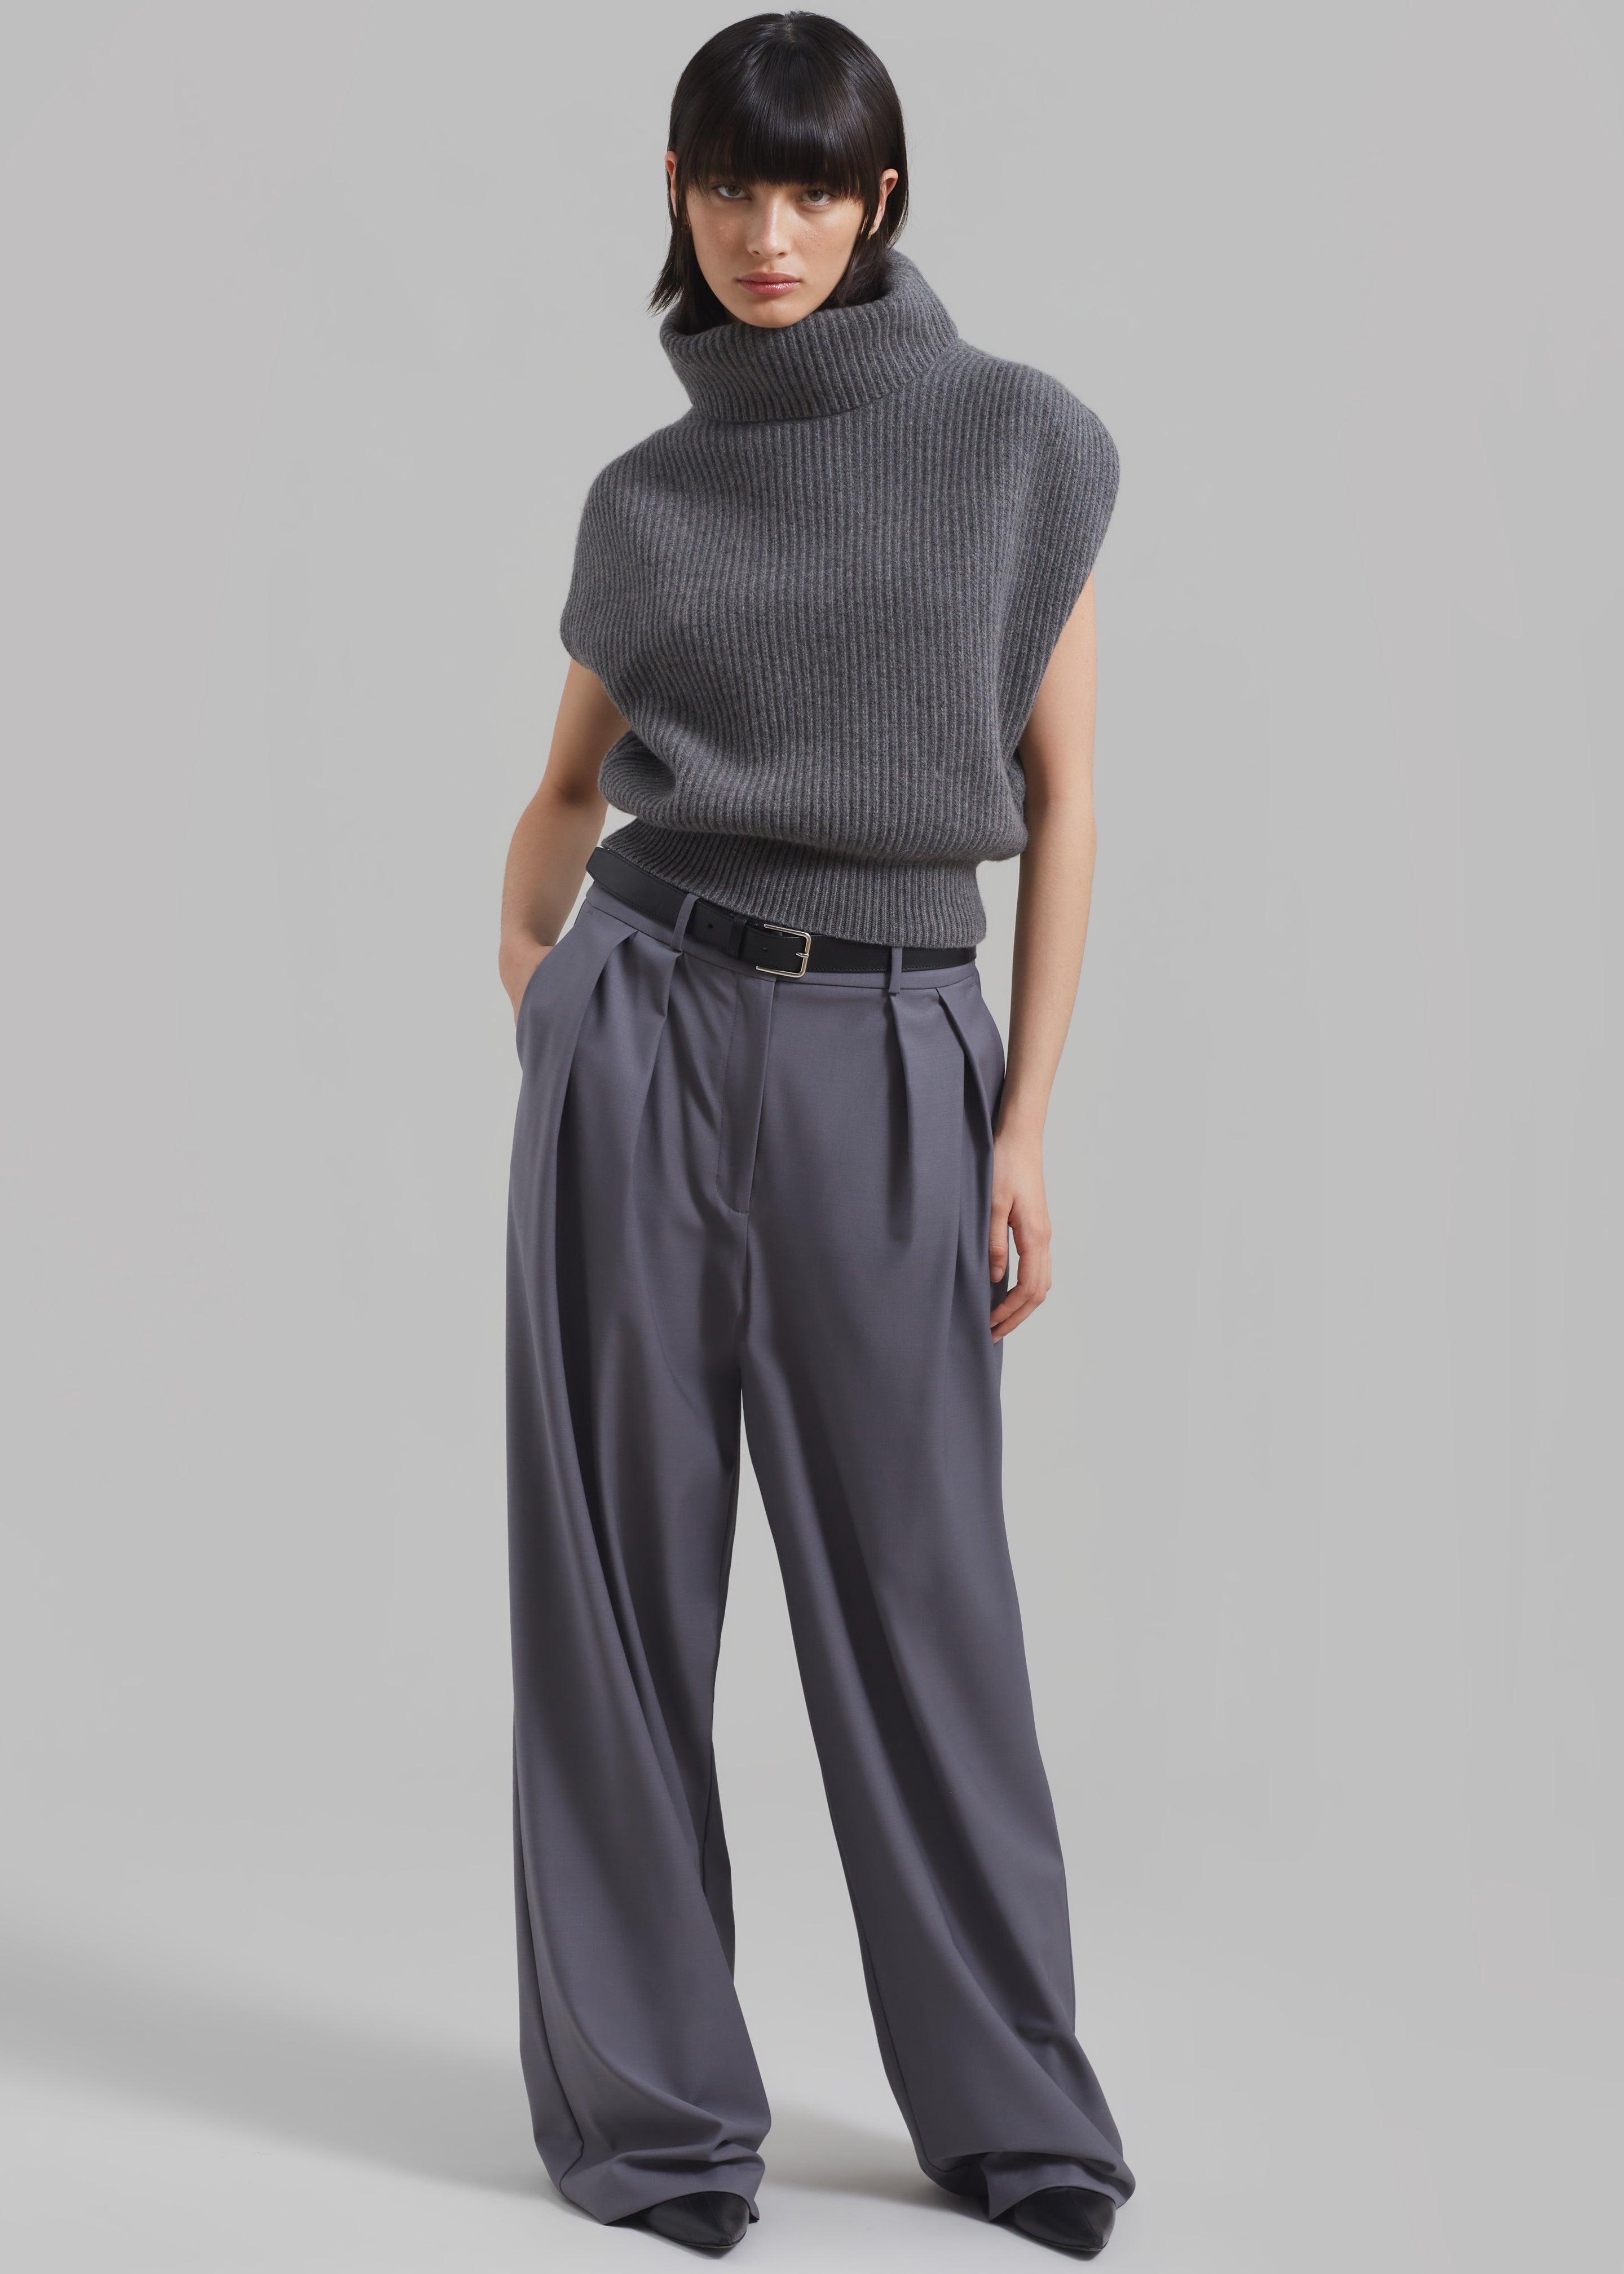 Ripley Pleated Trousers - Grey - 13